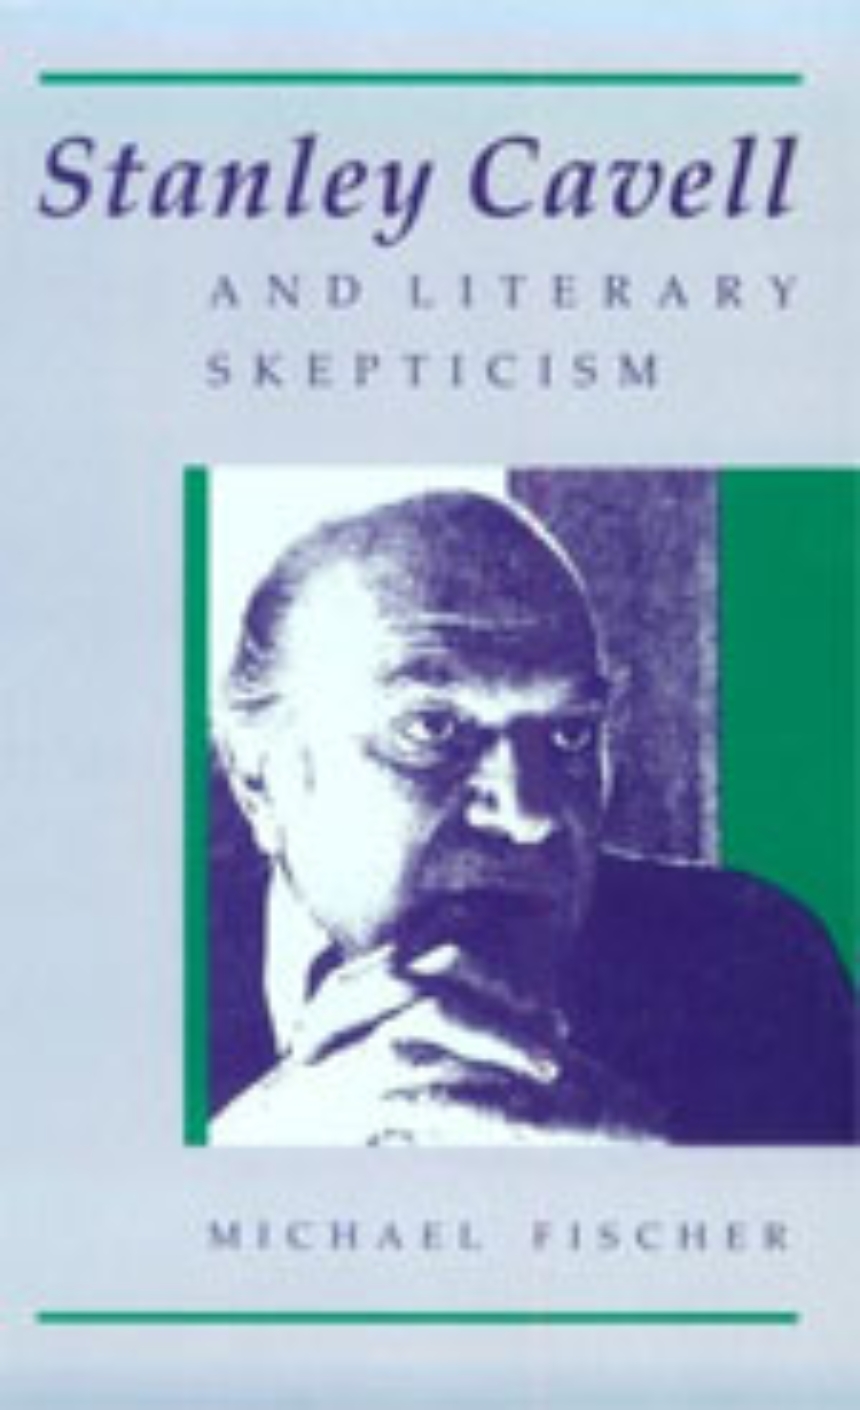 Stanley Cavell and Literary Skepticism